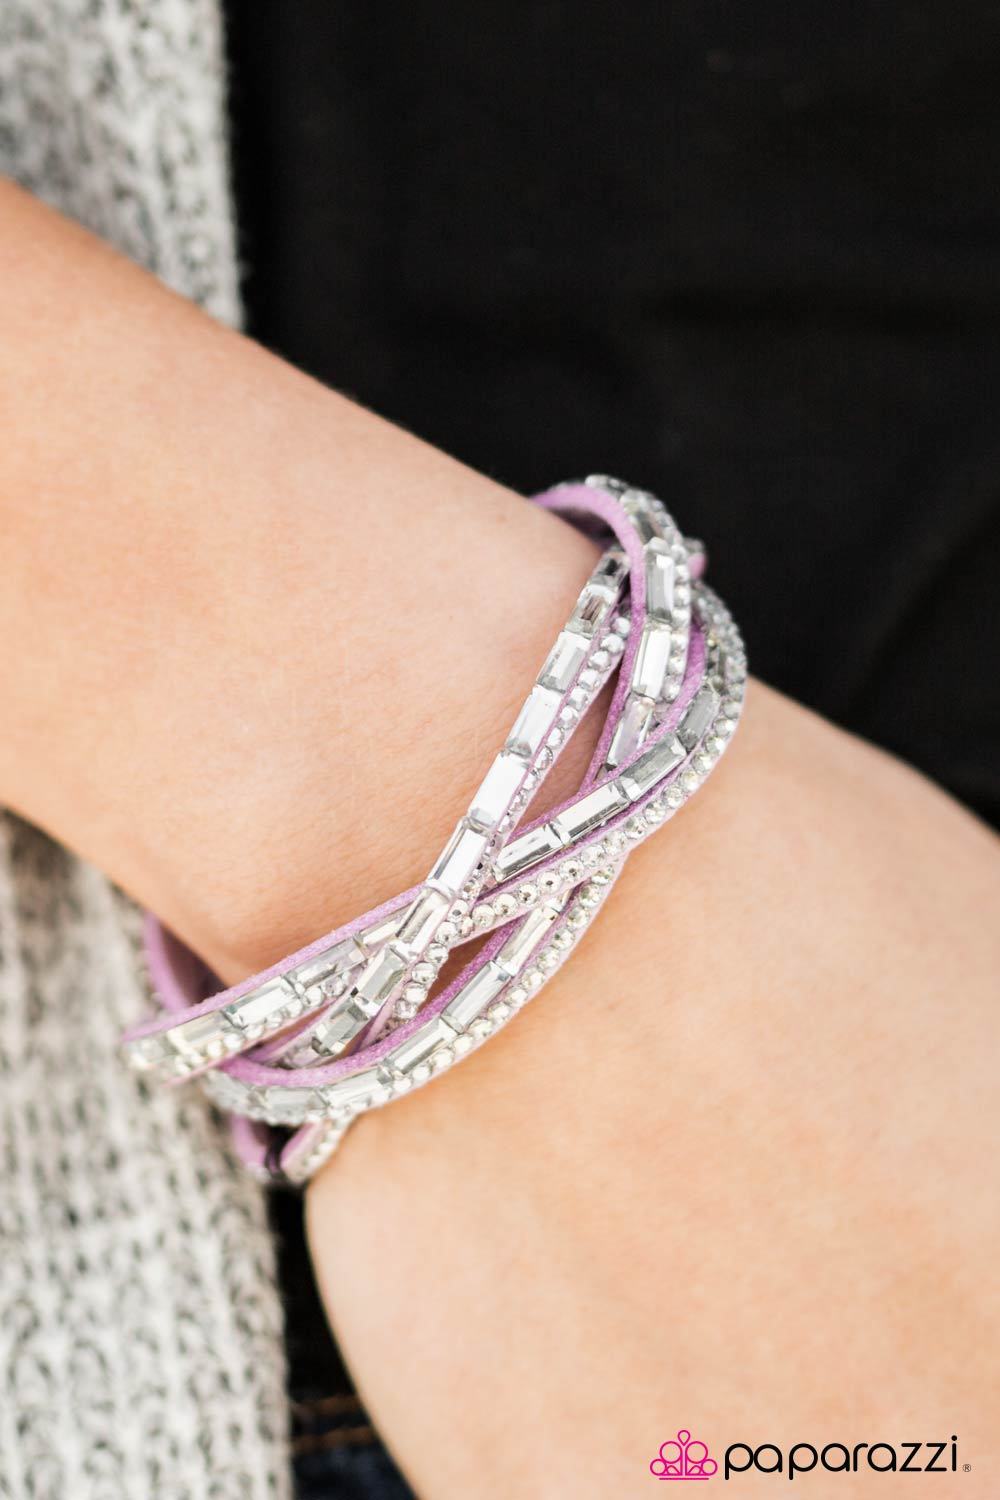 Too Cool for School Purple and White Braided Urban Wrap Snap Bracelet - Paparazzi Accessories-CarasShop.com - $5 Jewelry by Cara Jewels